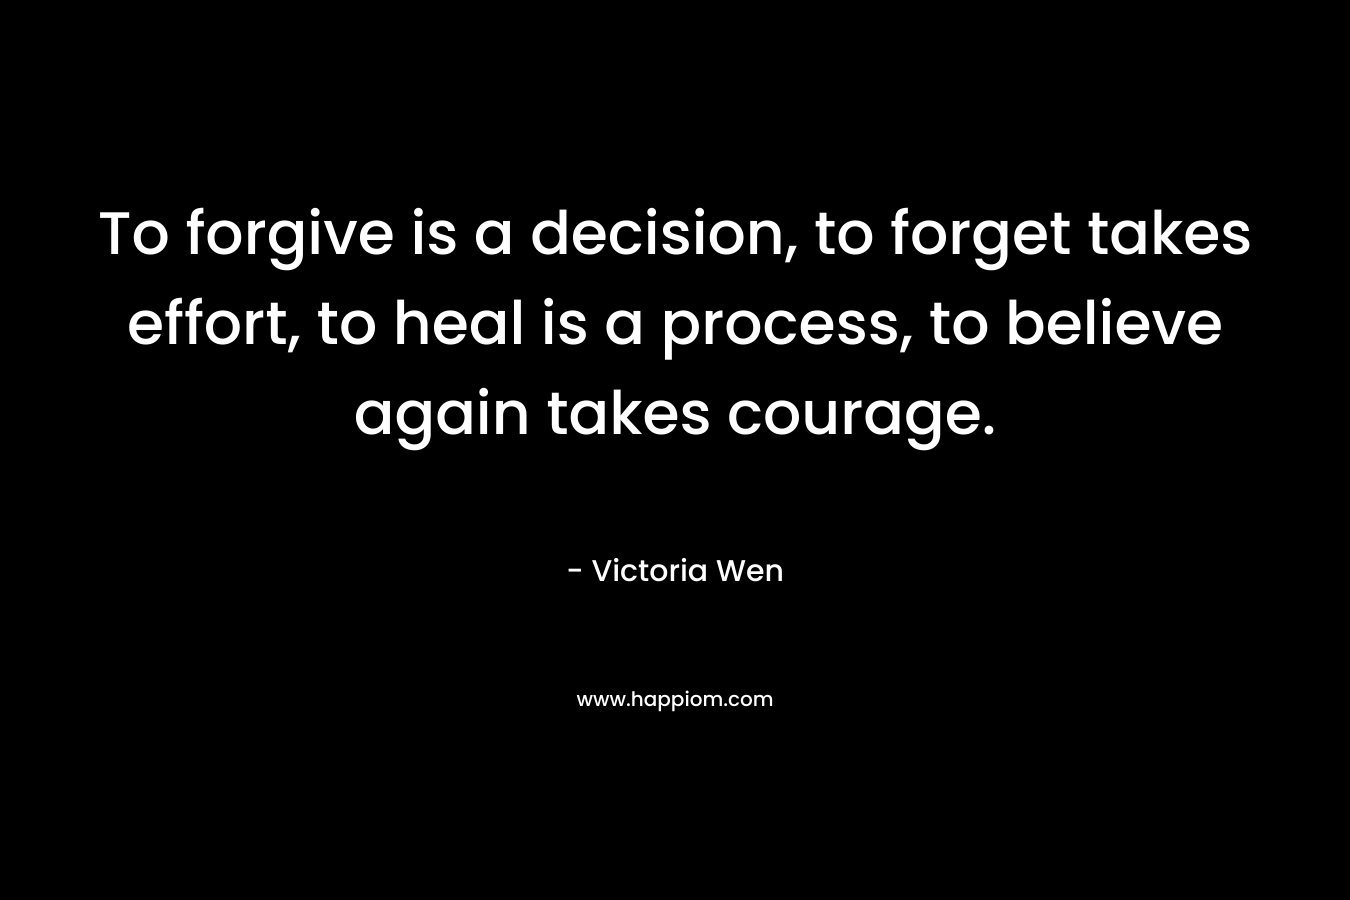 To forgive is a decision, to forget takes effort, to heal is a process, to believe again takes courage.